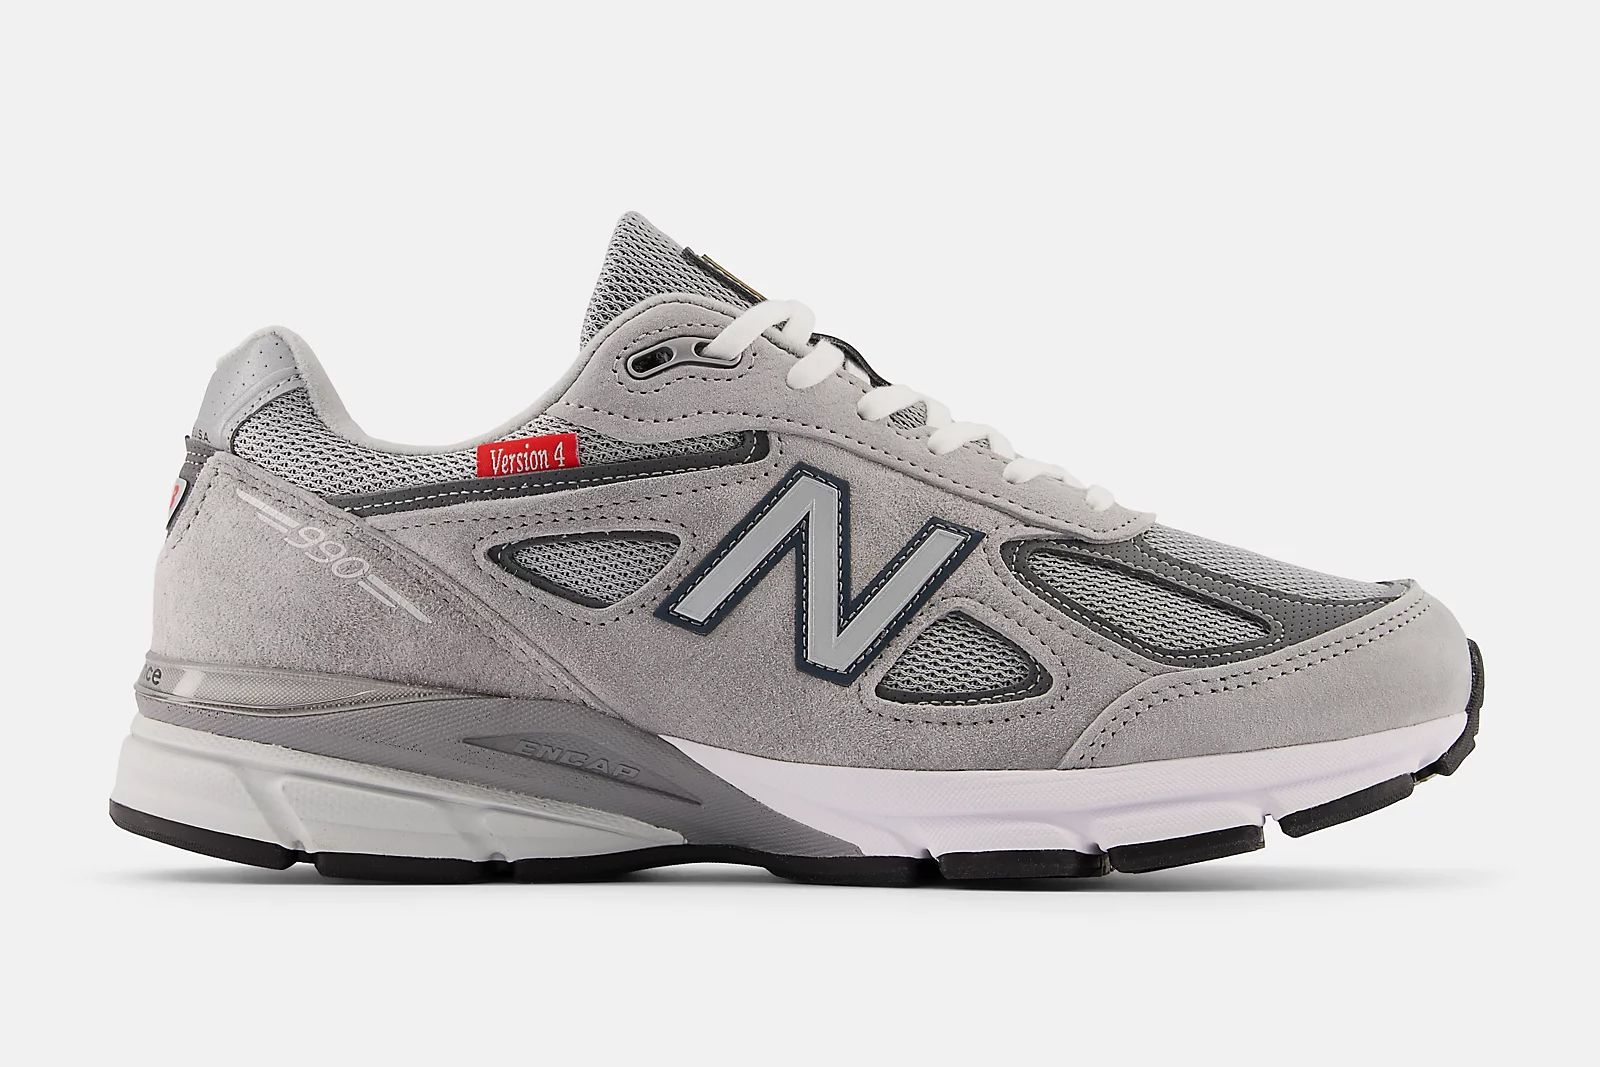 New Balance Complete the 'Version Series' with a 990v4 - Sneaker 